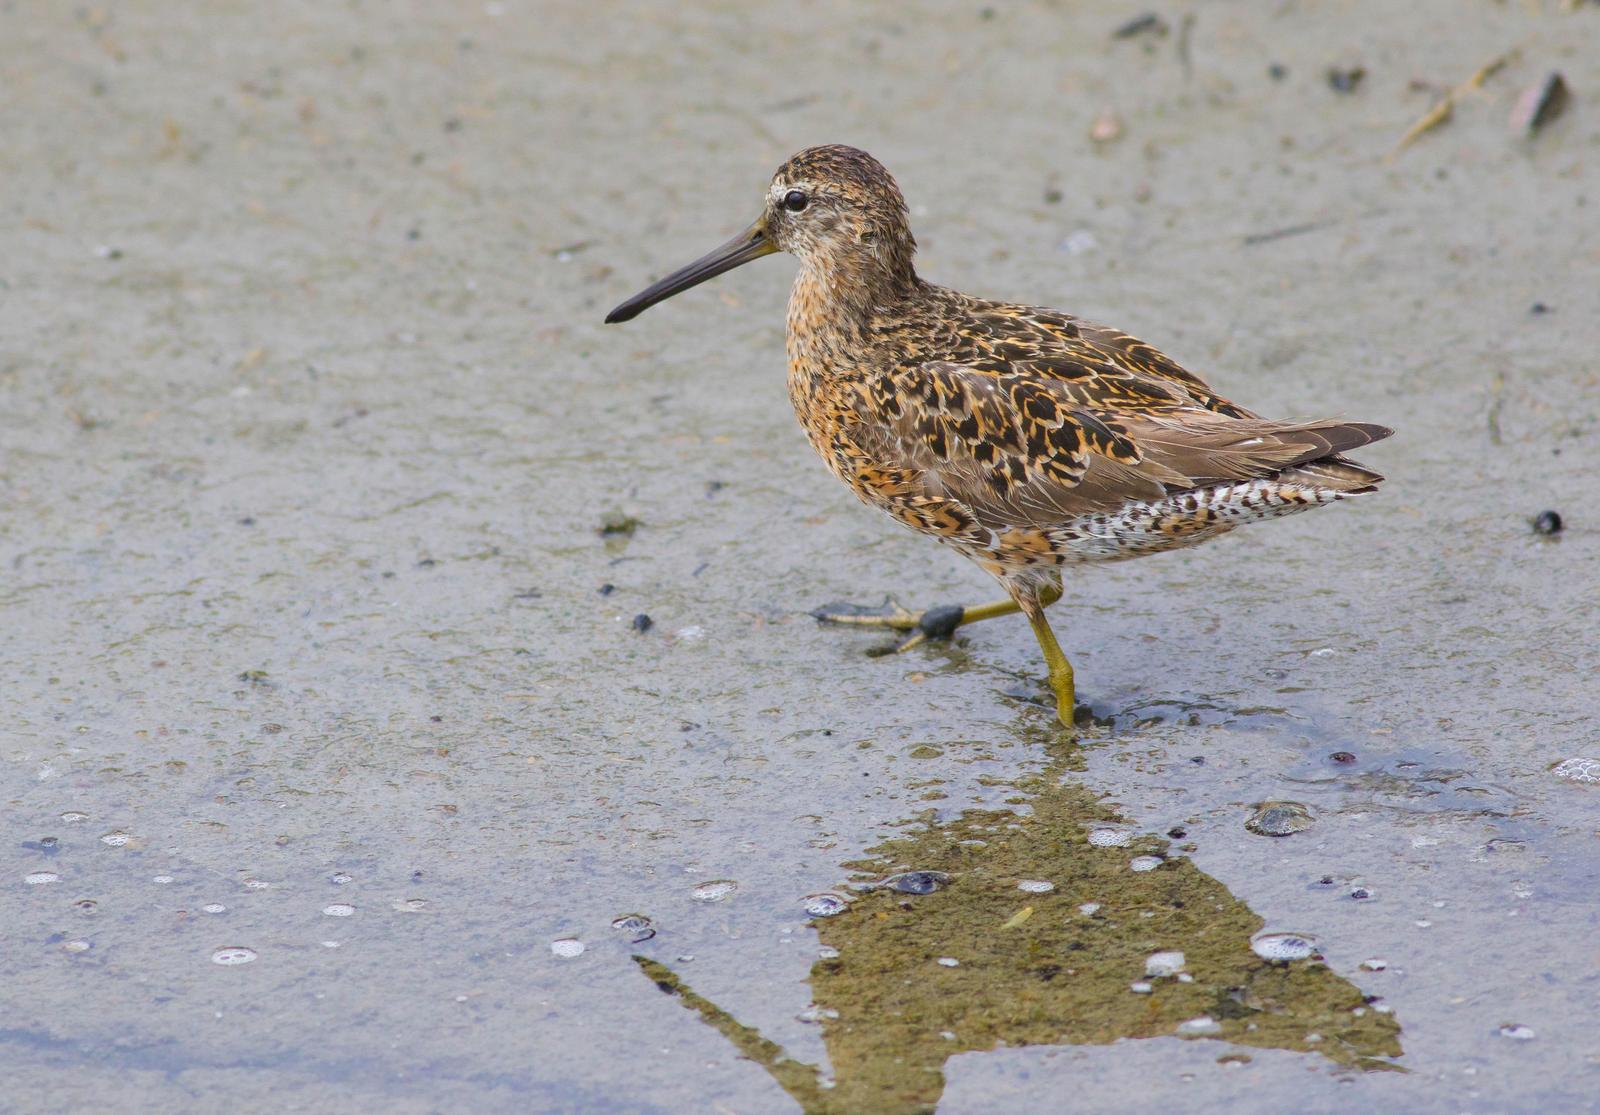 Short-billed Dowitcher Photo by Tom Ford-Hutchinson